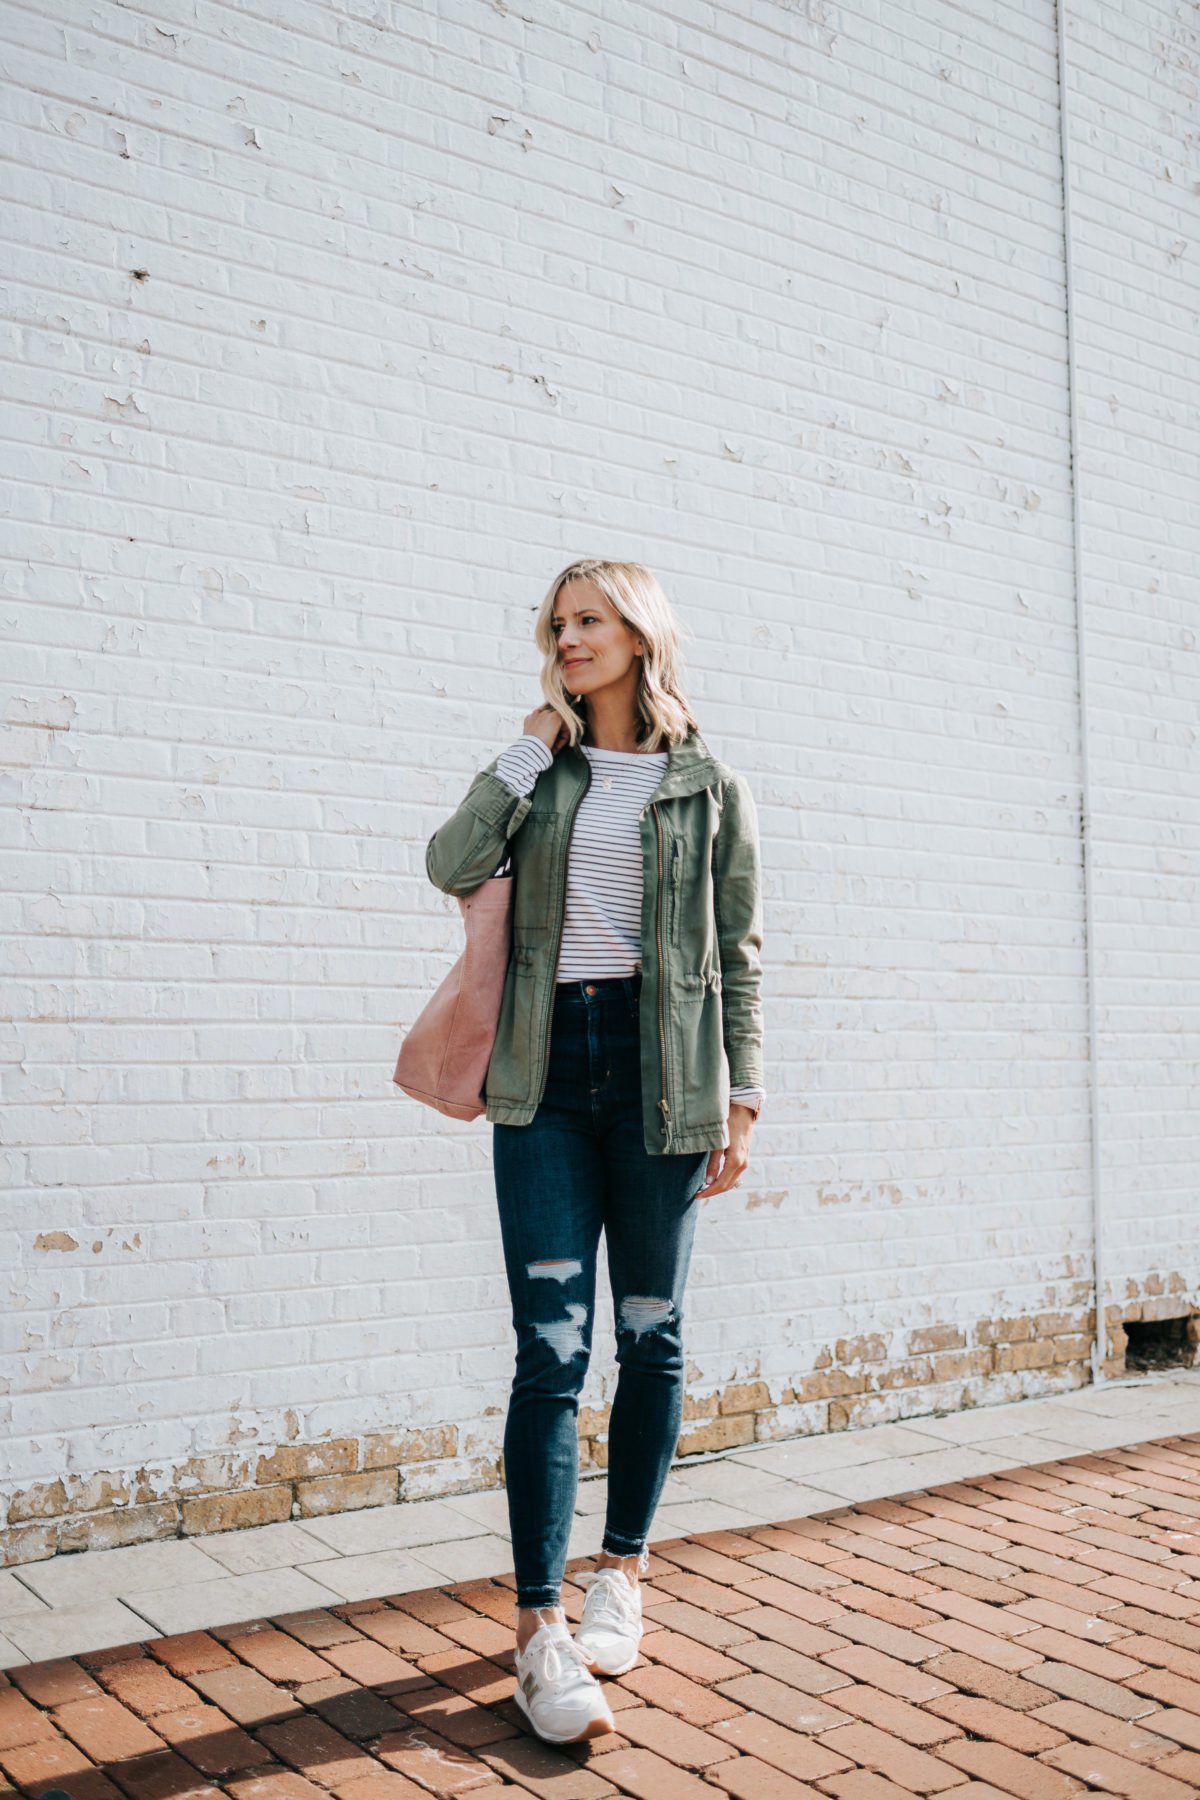 5 Style Basics You Need In Your Closet - My Kind of Sweet